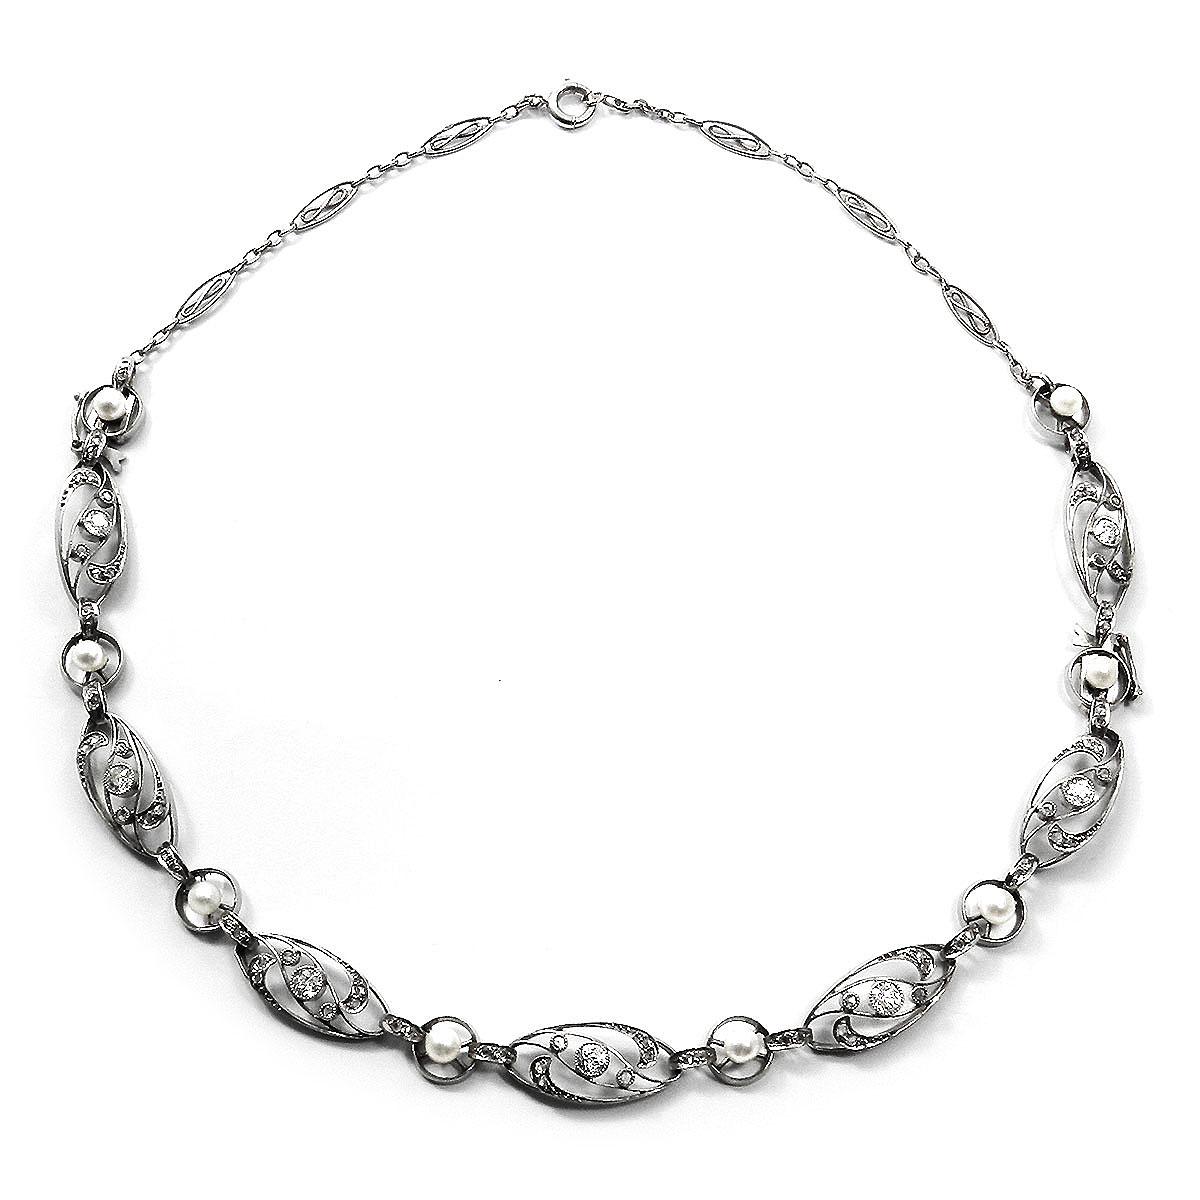 Art Nouveau Platinum Diamond Pearl Dual Bracelet / Necklace, Paris circa 1915

Two looks in one piece! This bracelet can be extended with a corresponding chain to become a choker necklace.

This delicate platinum bracelet features an openwork design